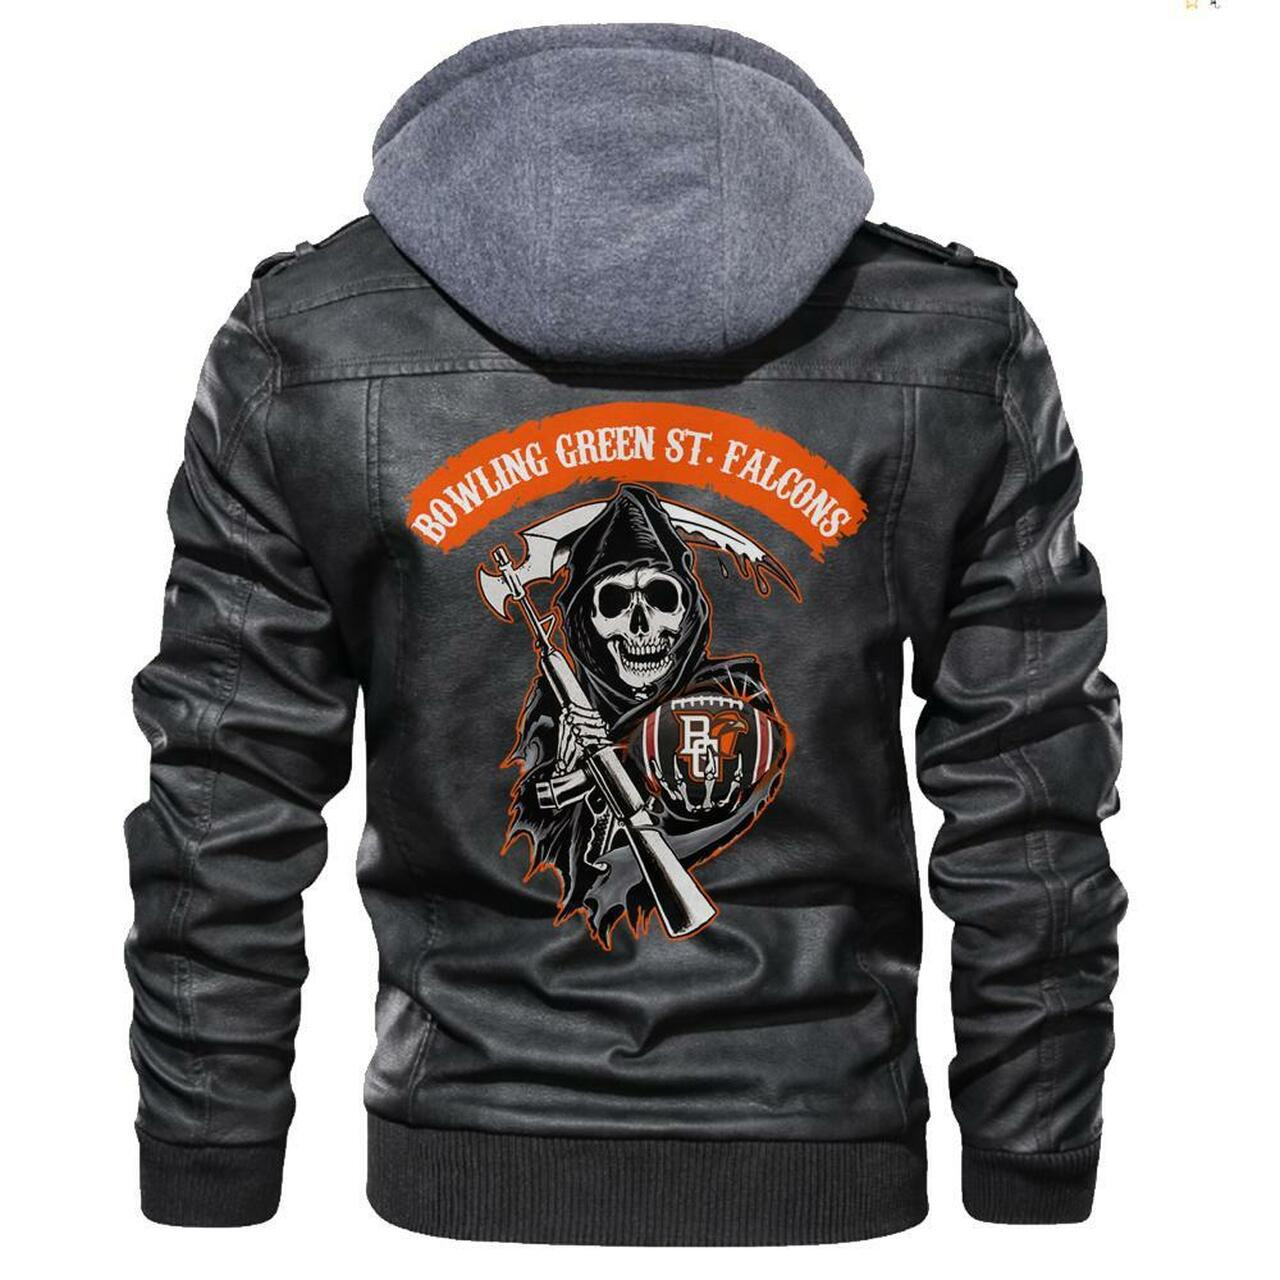 Our store has all of the latest leather jacket 24